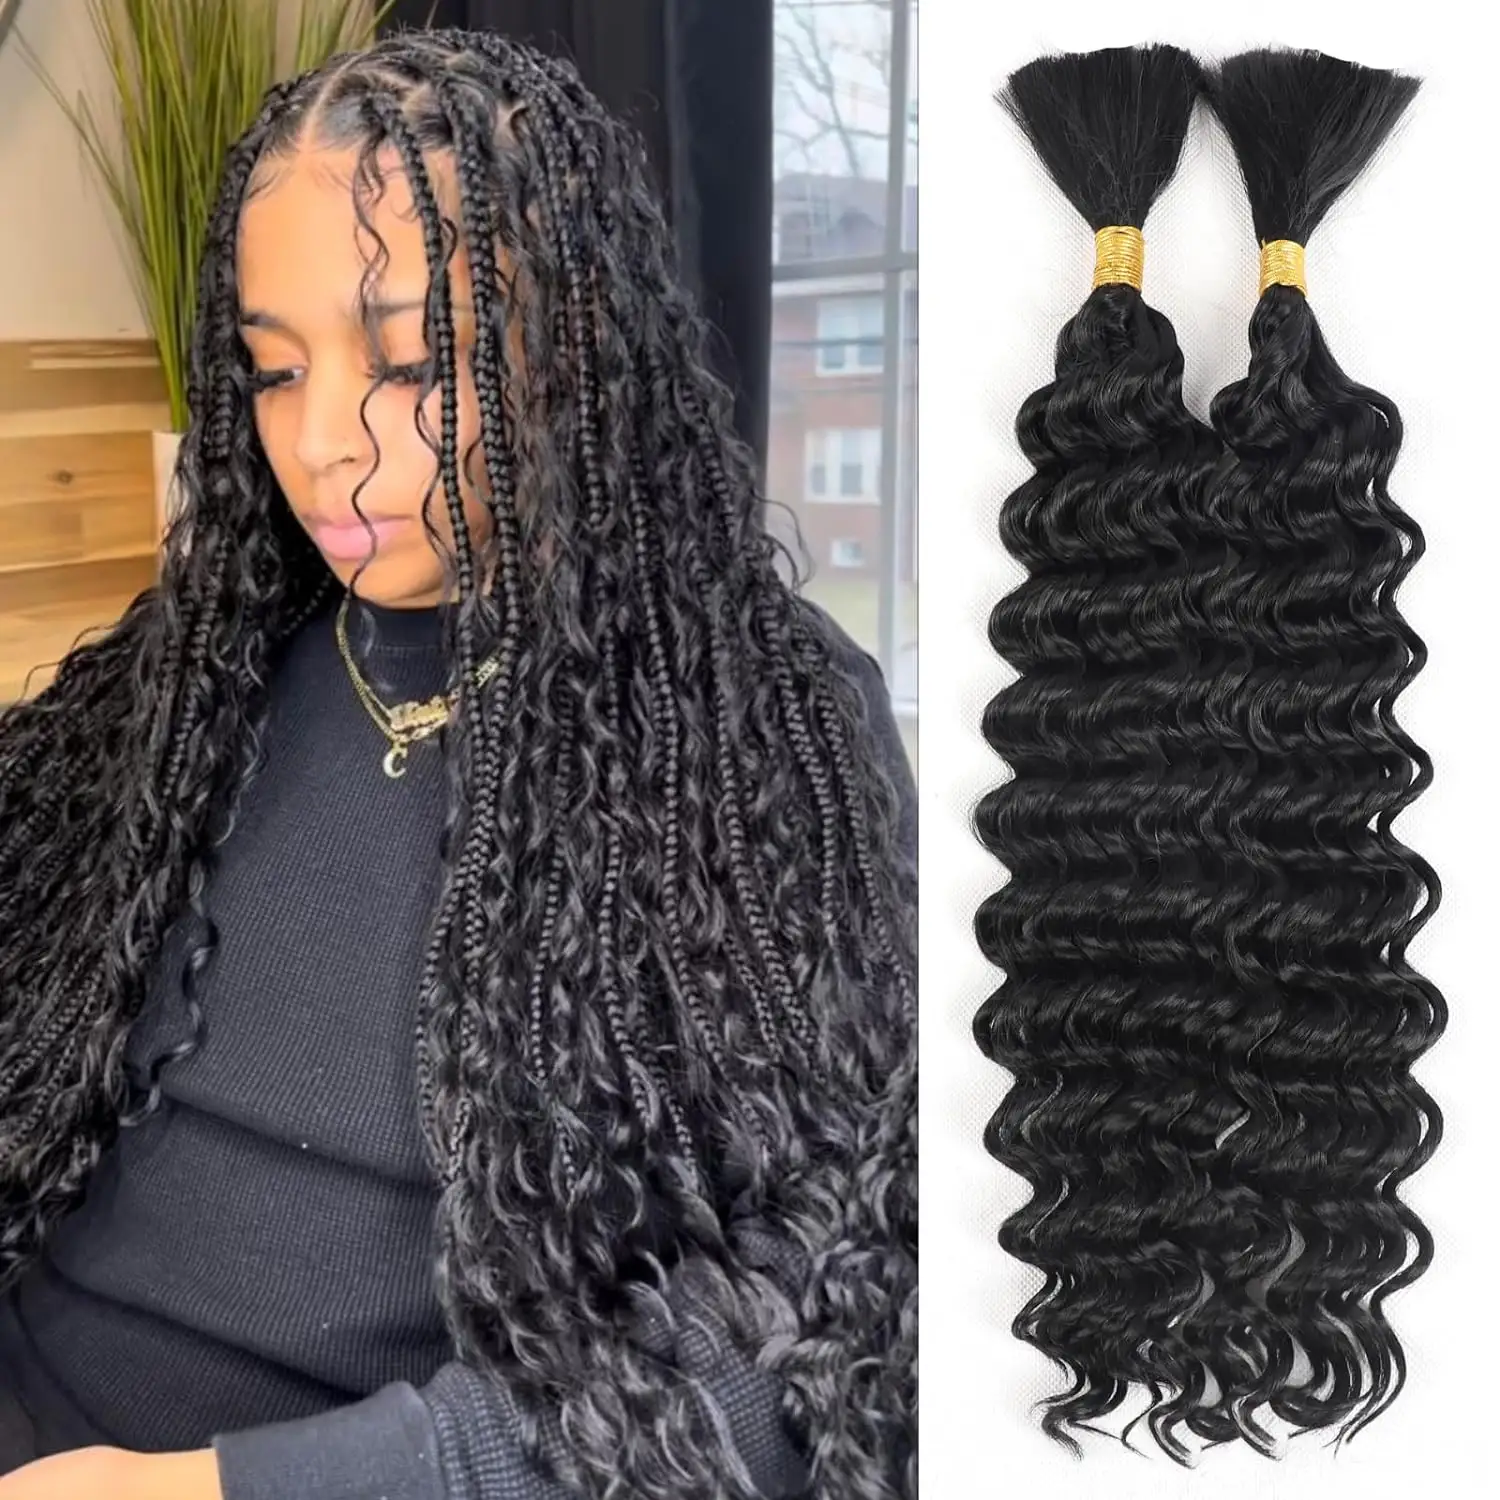 100% Human Hair No Tangle For Braiding Deep Wave Natural Black Hair Extensions No Weft Cuticle Aligned End